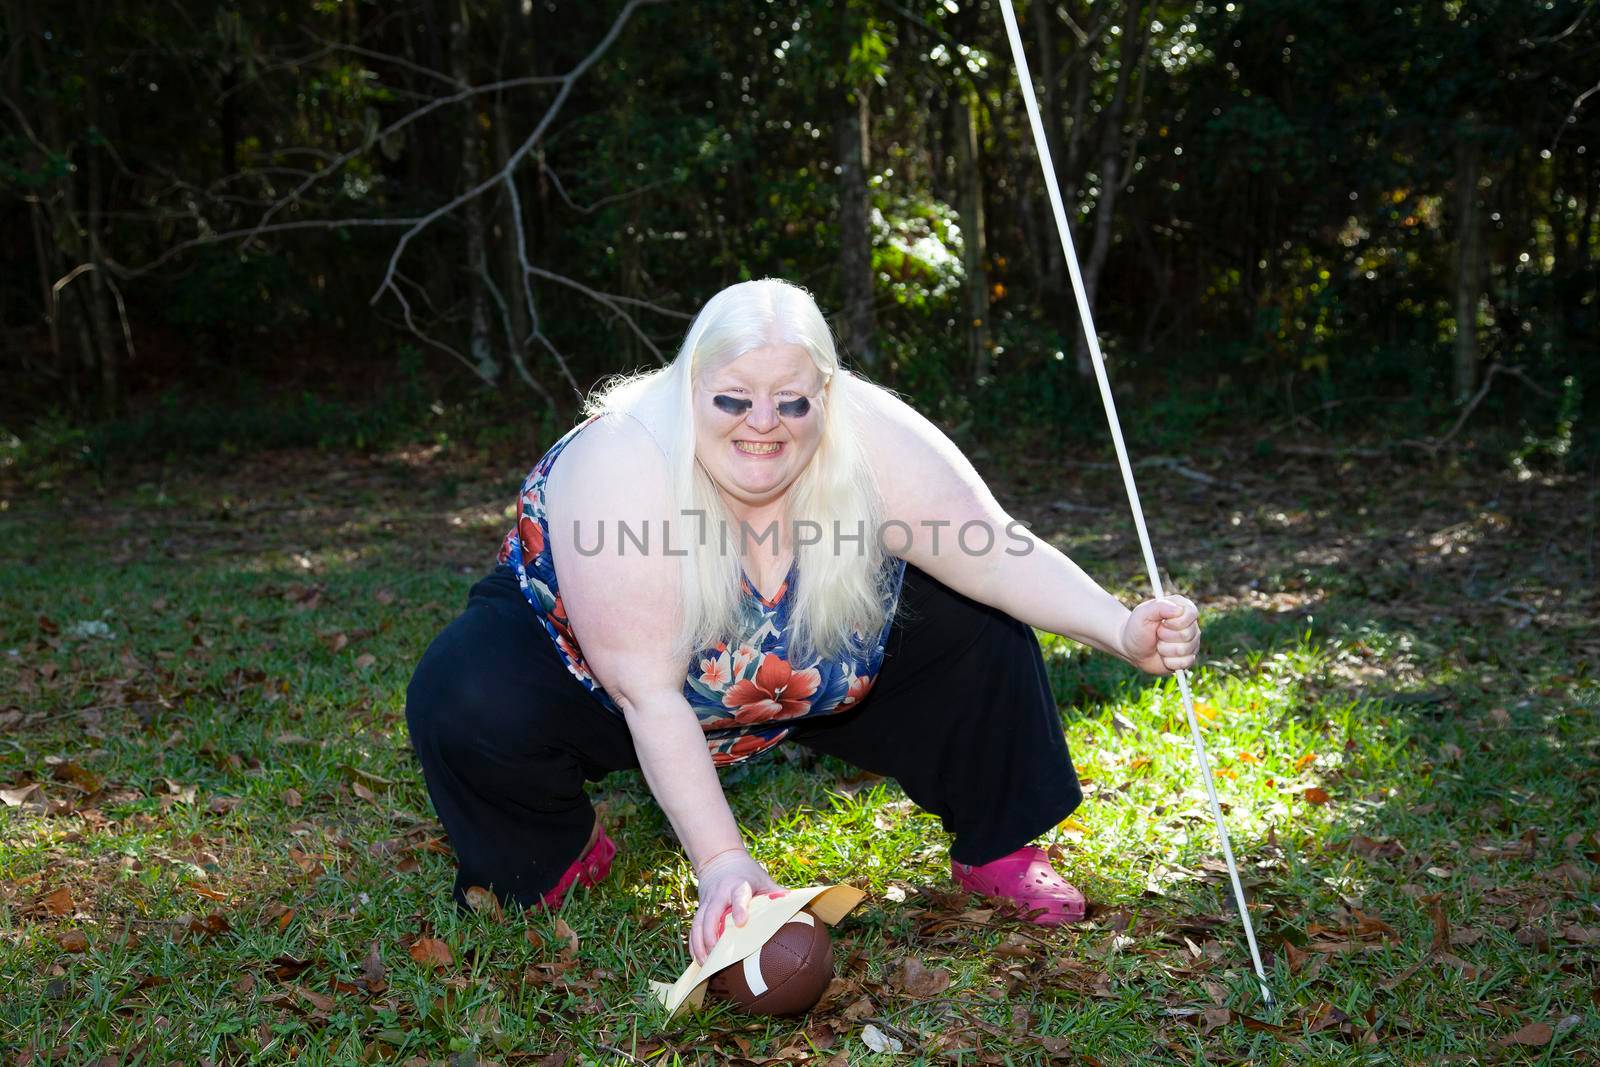 Blind woman preparing to hike a football wrapped in a paper hand-turkey